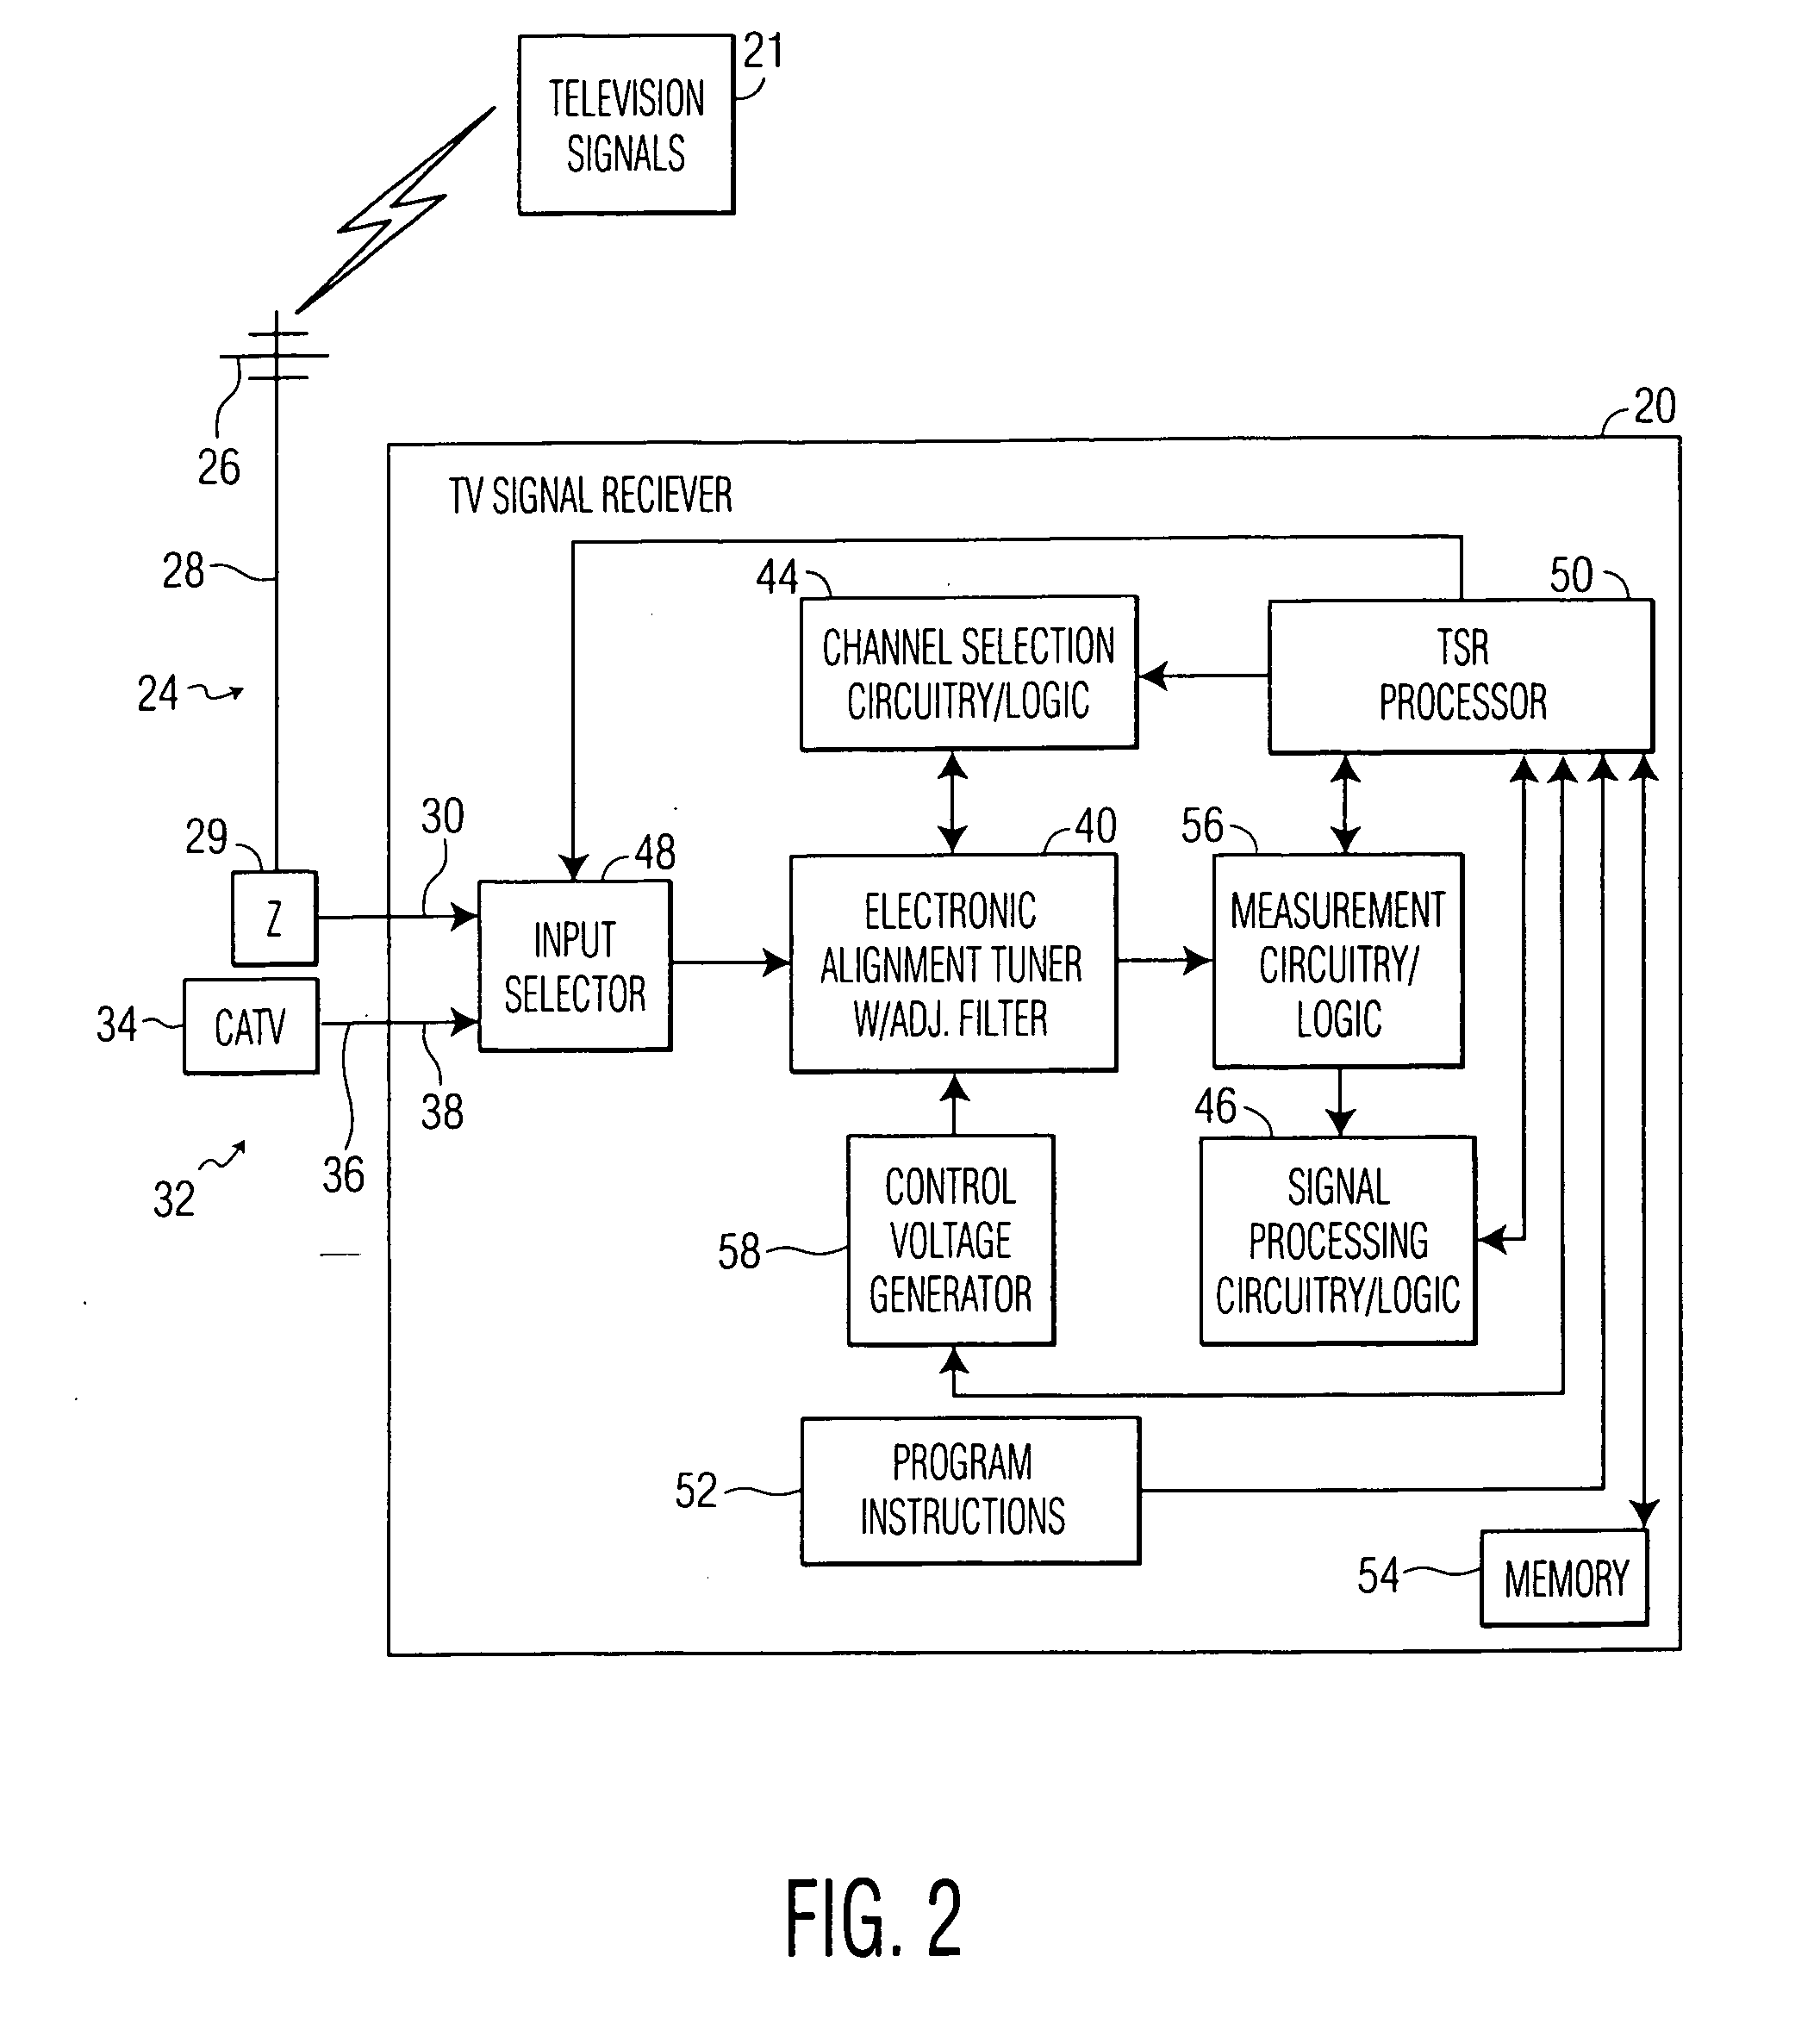 Tuner input filter with electronically adjustable response for adapting to antenna characteristic